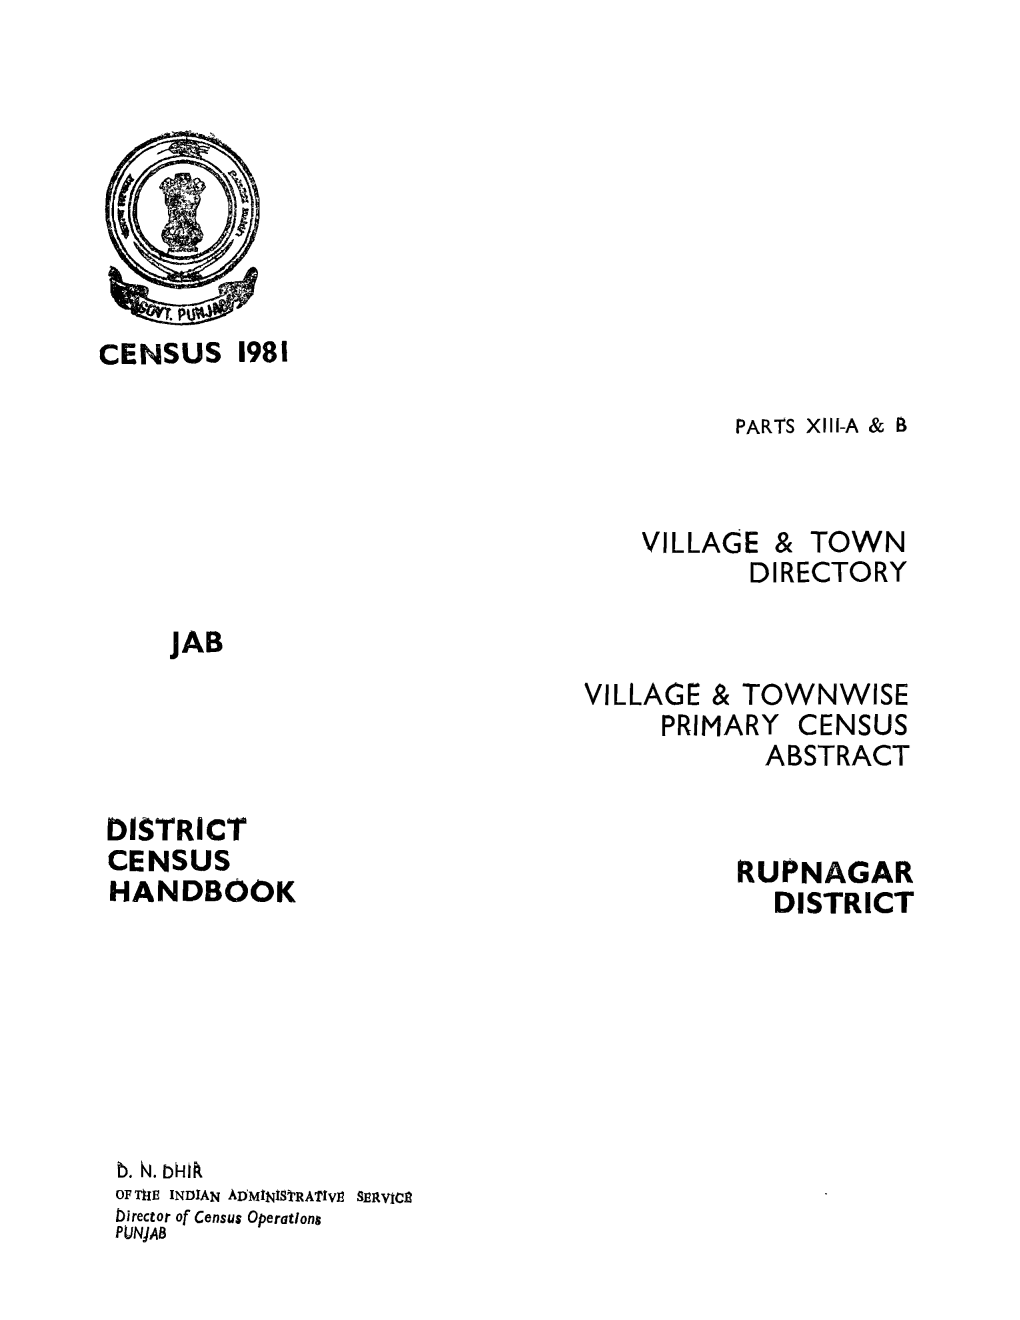 Village & Townwise Primary Census Abstract, Rupnagar, Part XIII-A & B, Series-17, Punjab